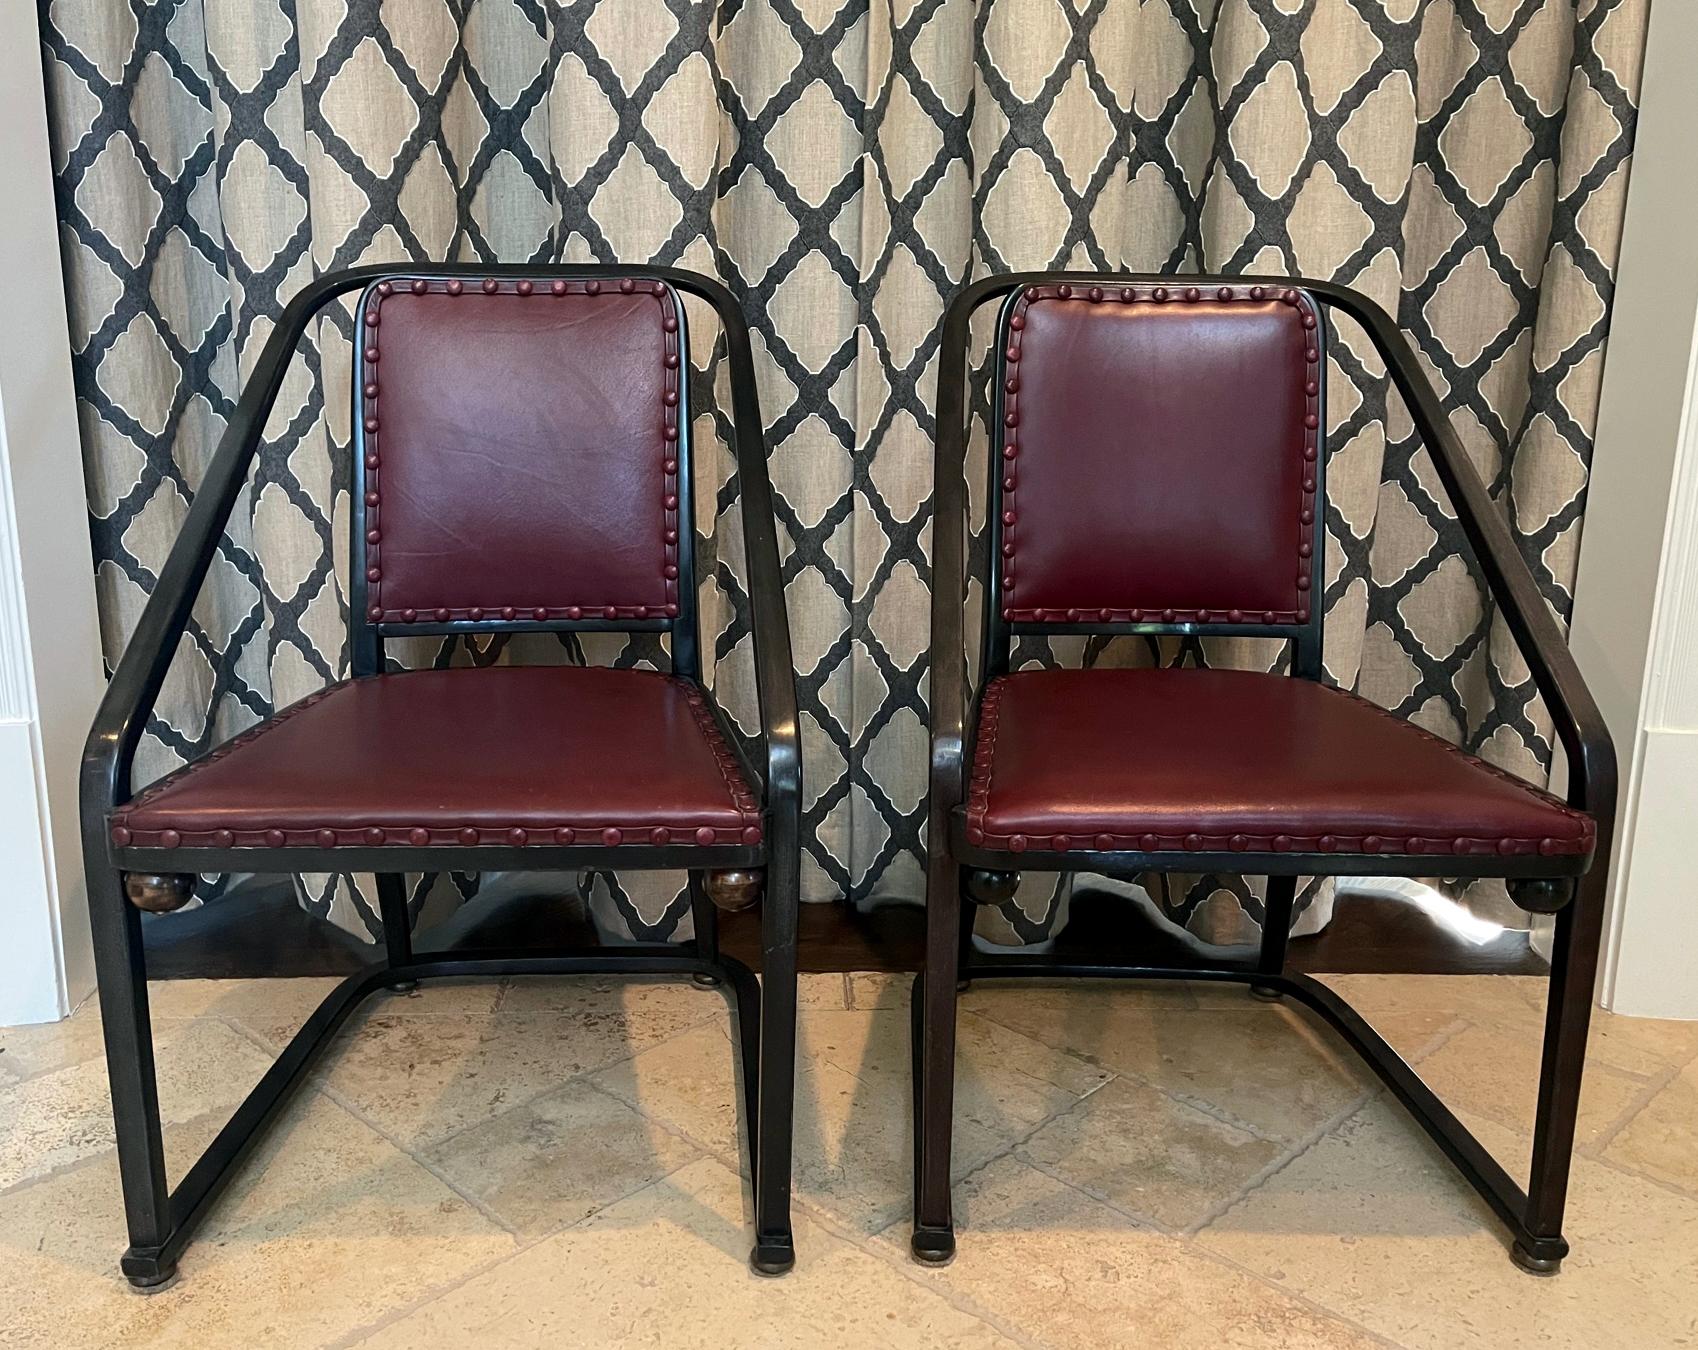 Pair of fantastic Vienna Secession bentwood chairs with upholstery designed by Josef Hoffman (1870-1956) and manufactured by J. & J. Kohn circa early 20th century. These armchairs are model 725 B/F designed in 1905 and are dated from the original